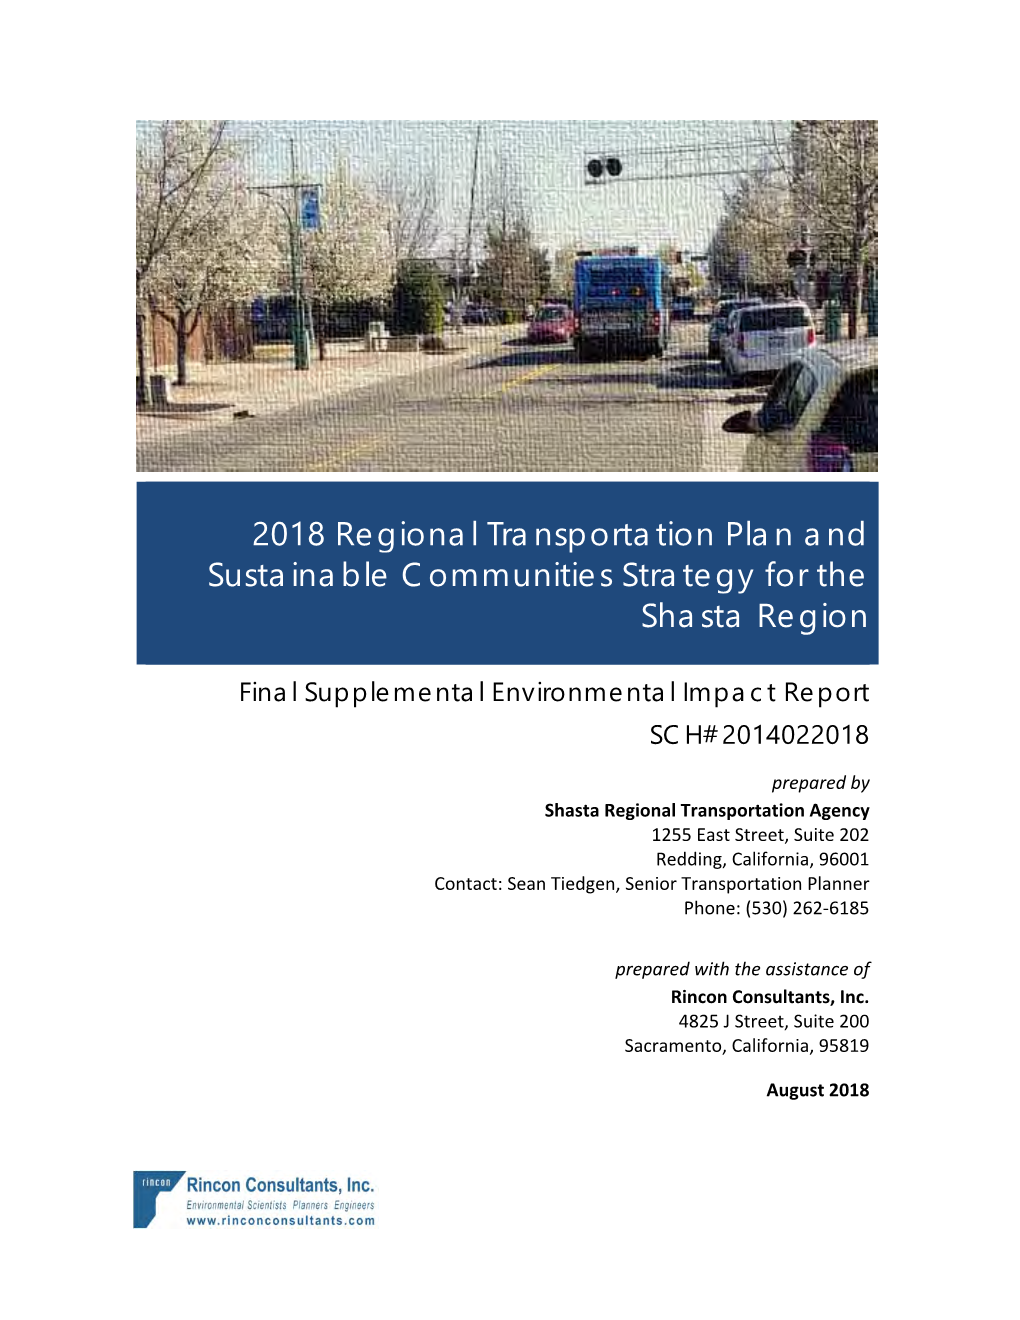 2018 Regional Transportation Plan and Sustainable Communities Strategy for the Shasta Region